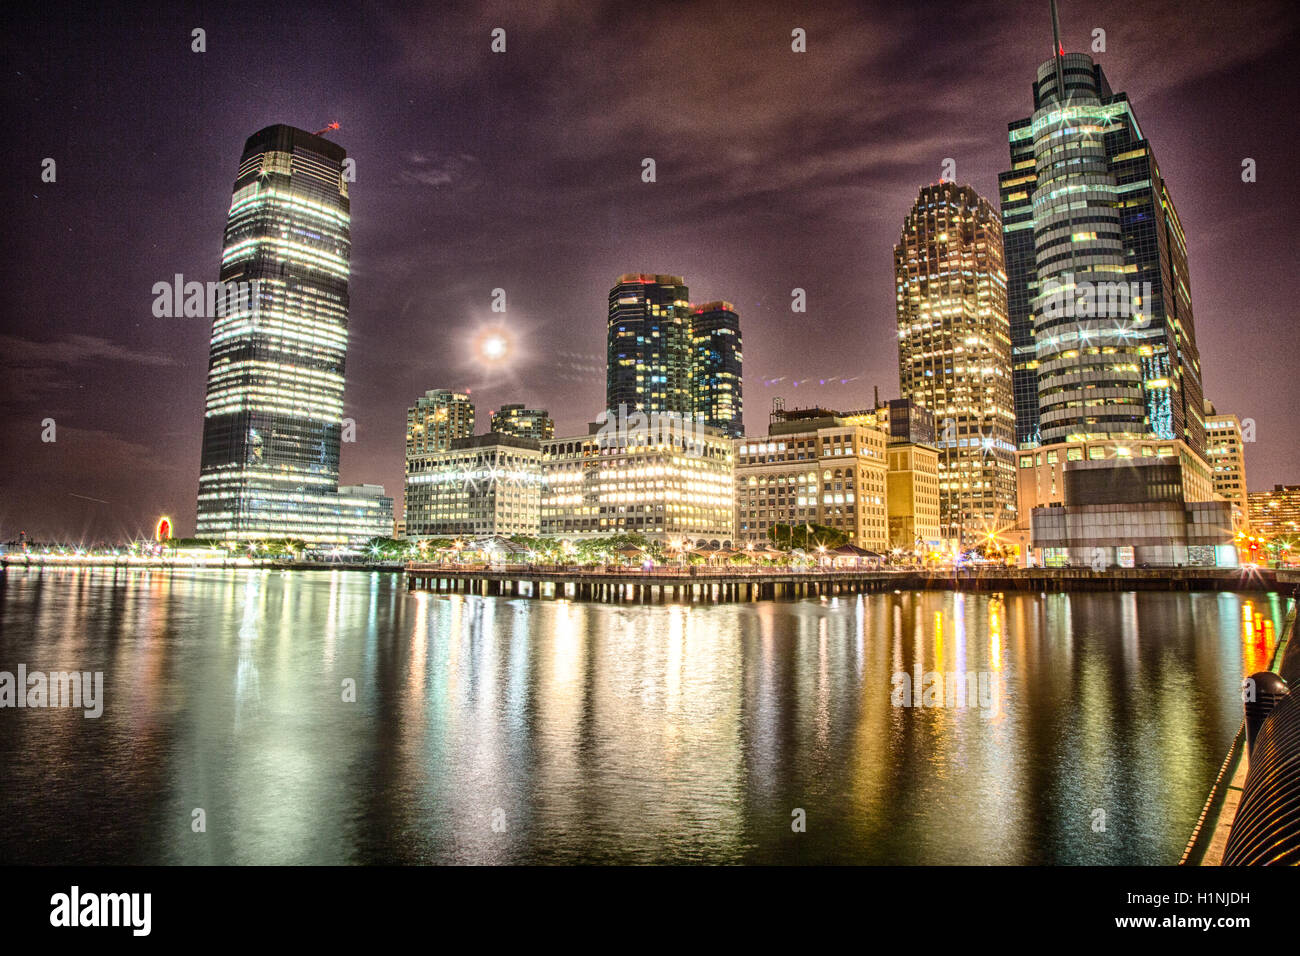 Jersey City, New Jersey, USA, August 12, 2016: The Skyline of Jersey City with a full moon. Stock Photo